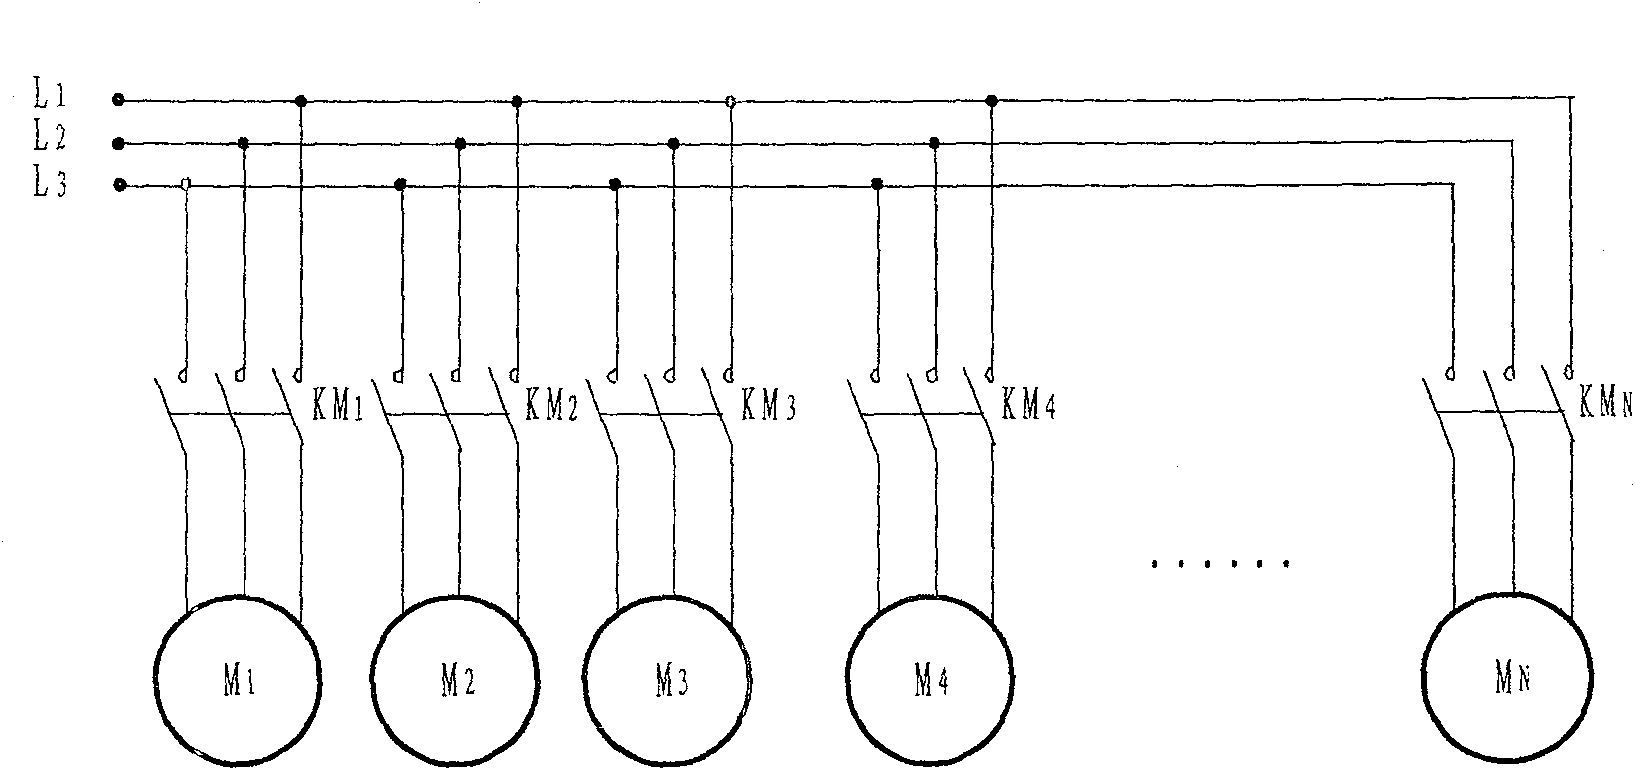 Circuit and method for distant controlling a plurality of electrical equipments by a pair of push-buttons